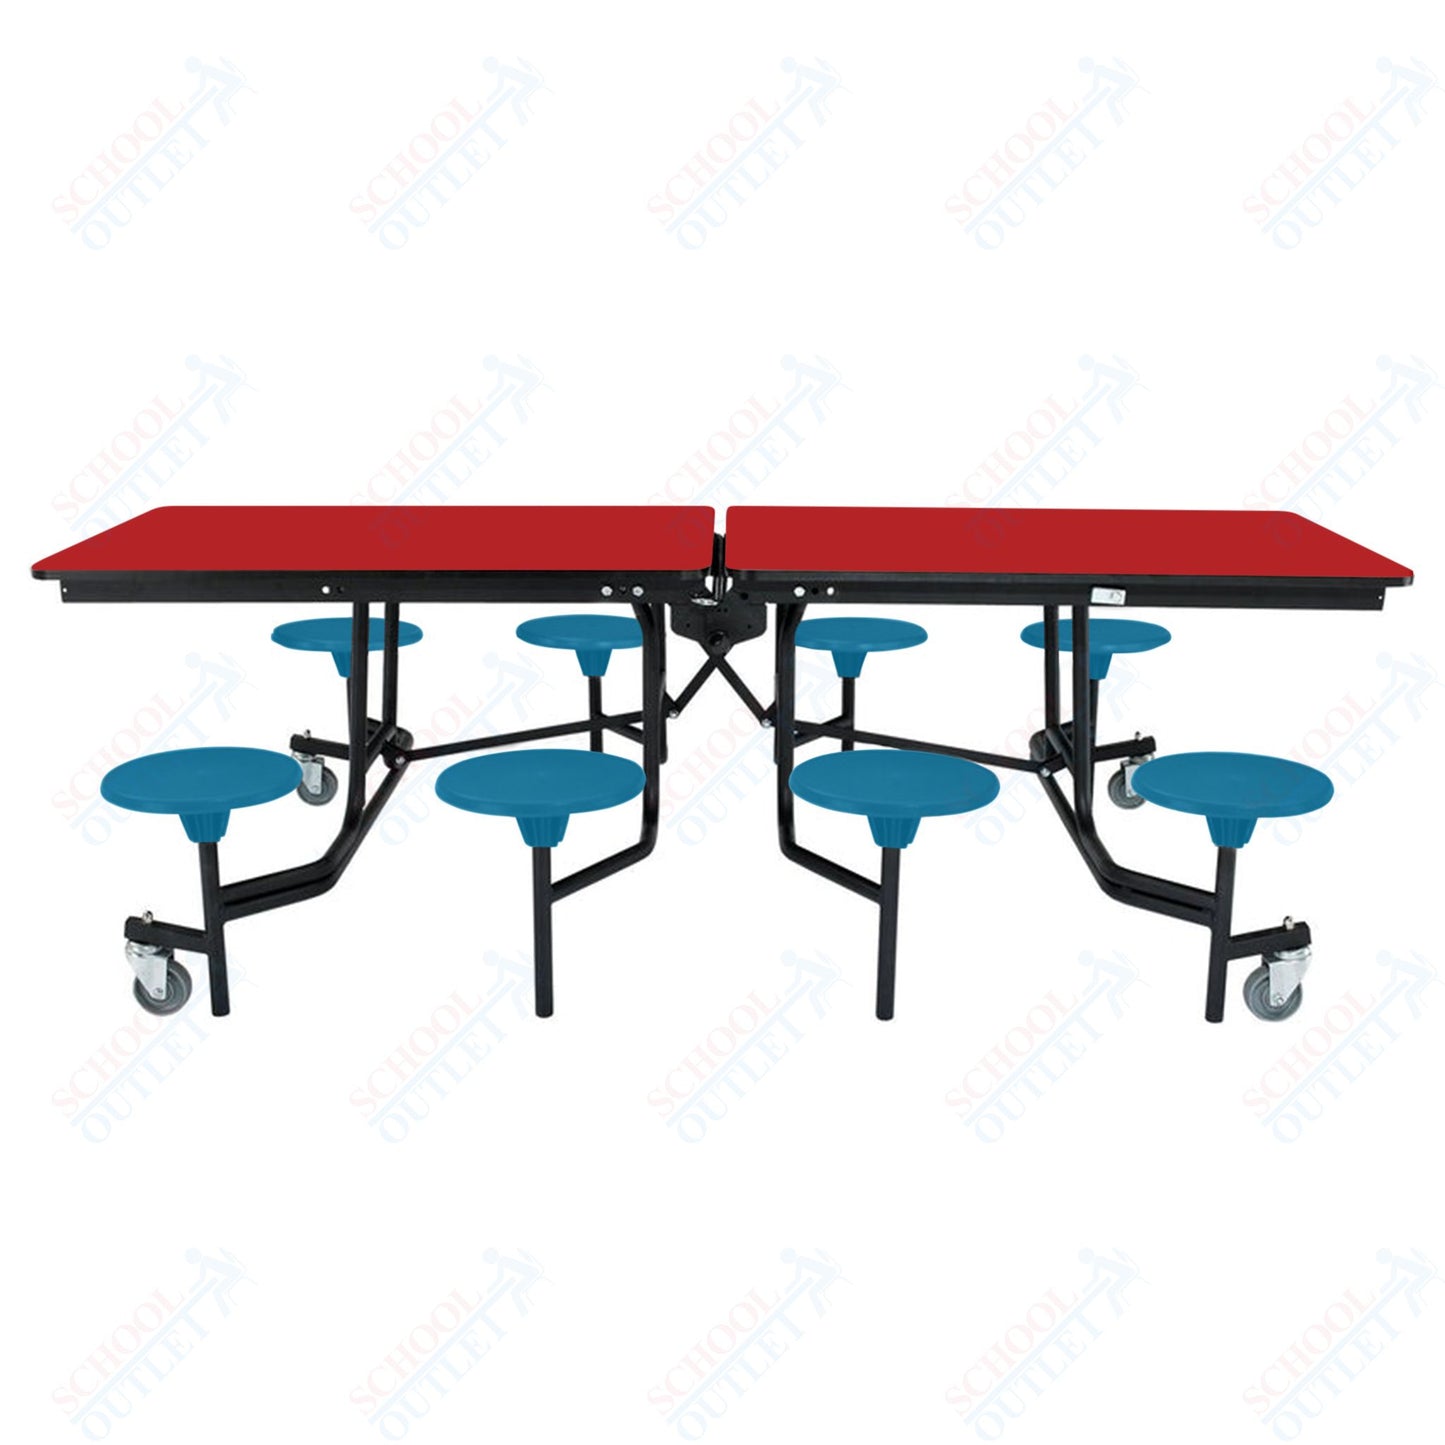 NPS Mobile Cafeteria Table - 30" W x 8' L - 8 Stools - Plywood Core - T-Molding Edge - Black Powdercoated Frame